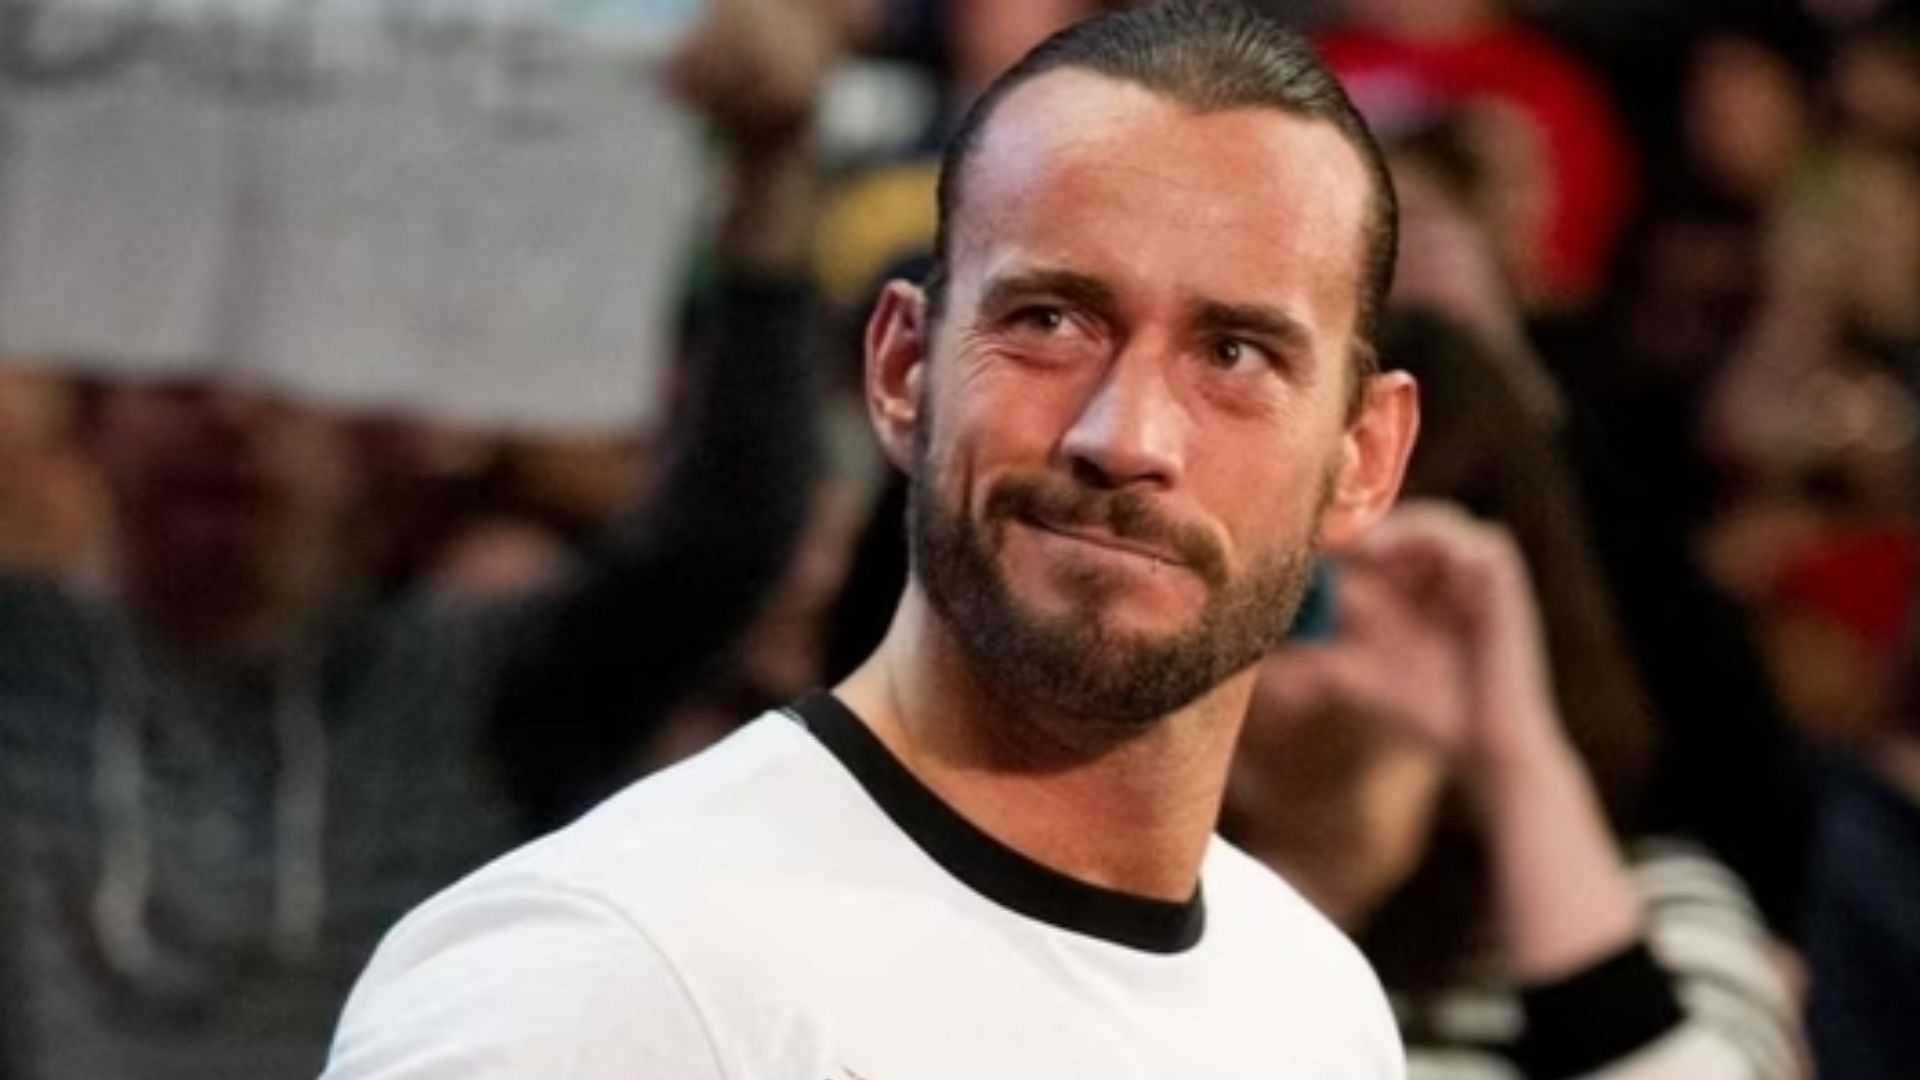 CM Punk is a former World Champion in WWE